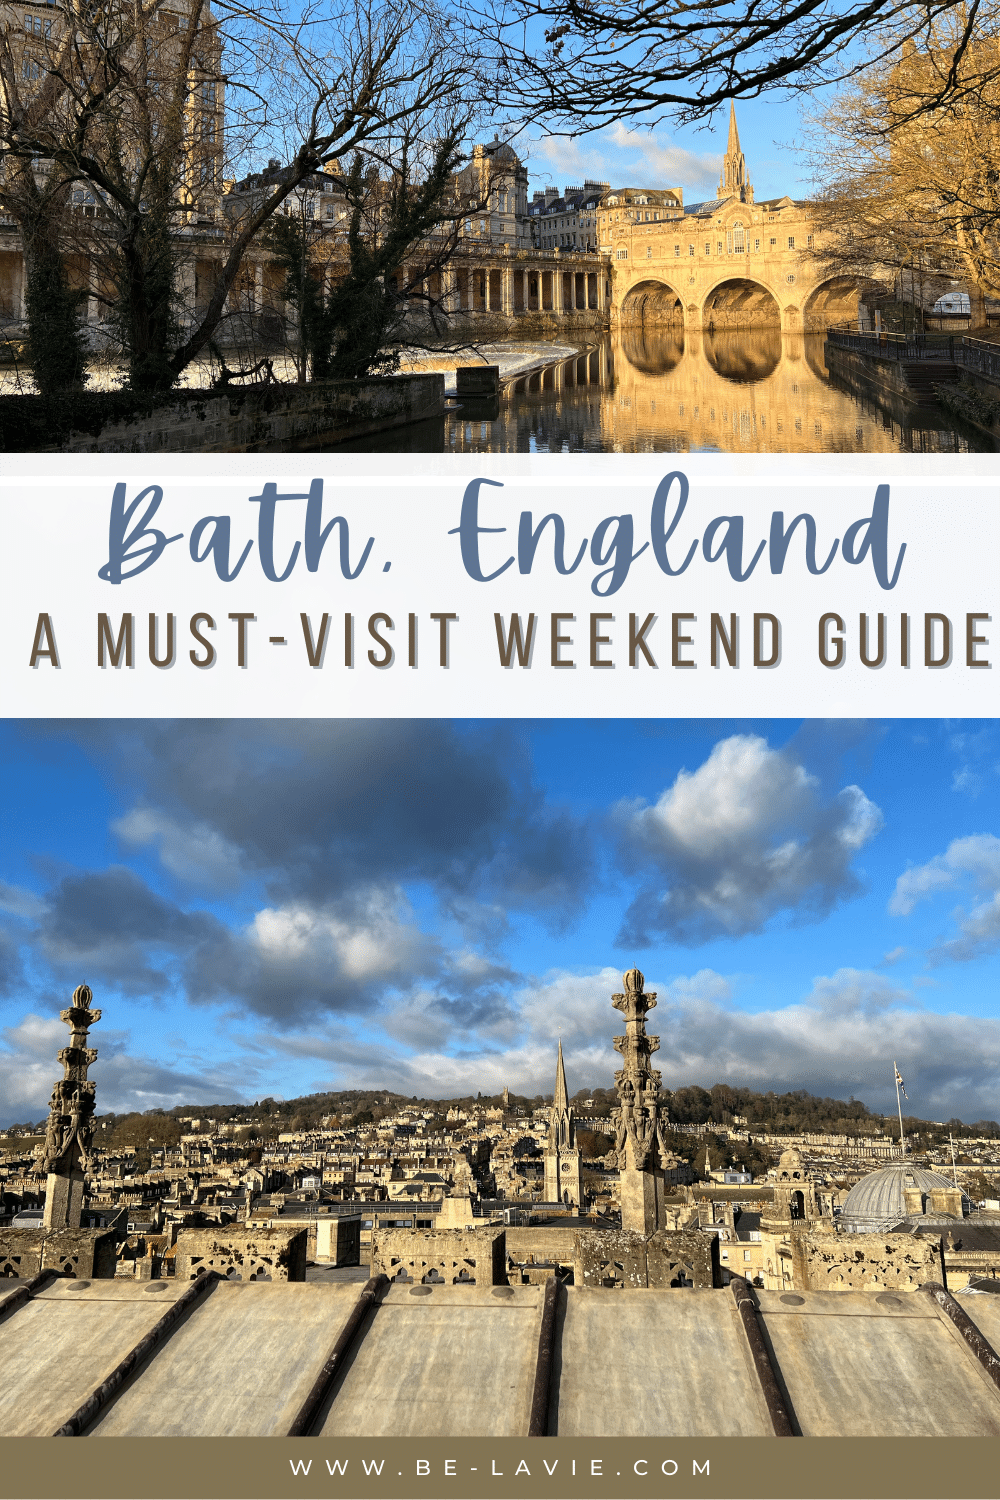 Ultimate Weekend Guide to Bath Pinterest Pin